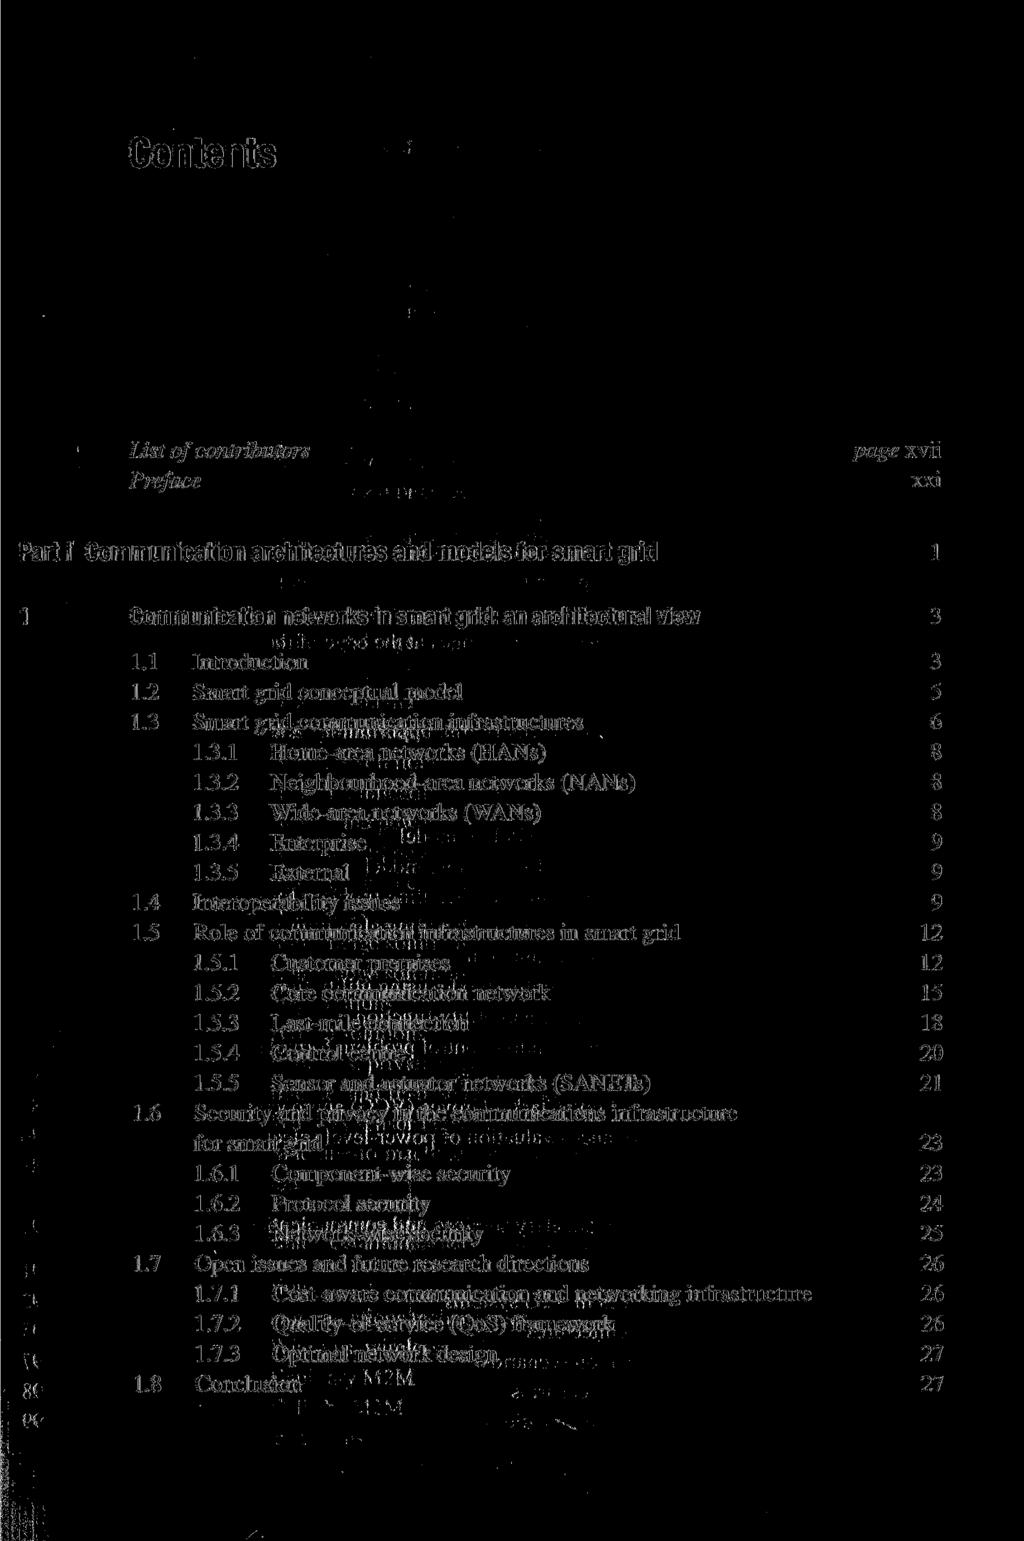 Contents List of contributors Preface page xvii xxi Part i Communication architectures and models for smart grid l 1 Communication networks in smart grid: an architectural view 3 1.1 Introduction 3 1.